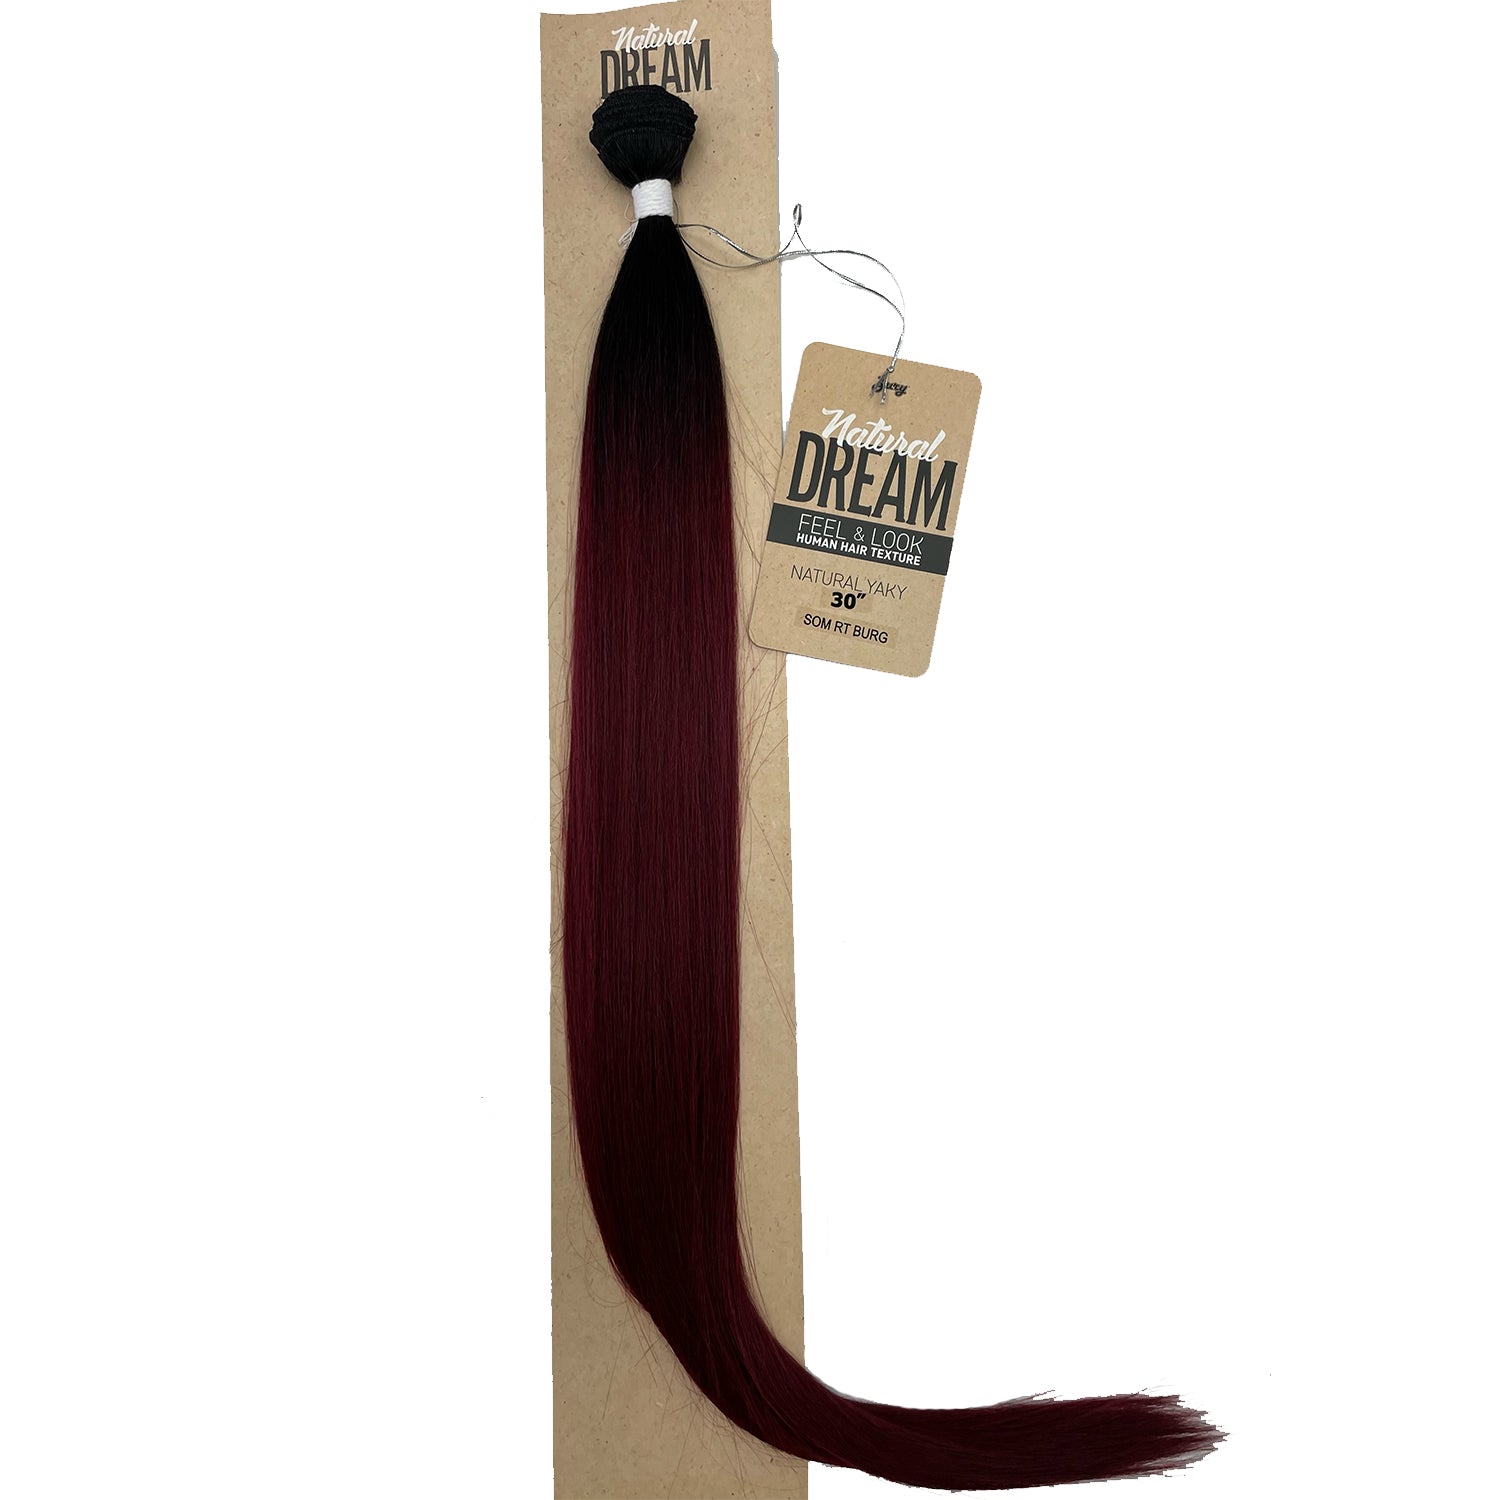 Zury Natural Dream Feel & Look Hair Extension Bundle, Natural Yaky 30" Burgundy red